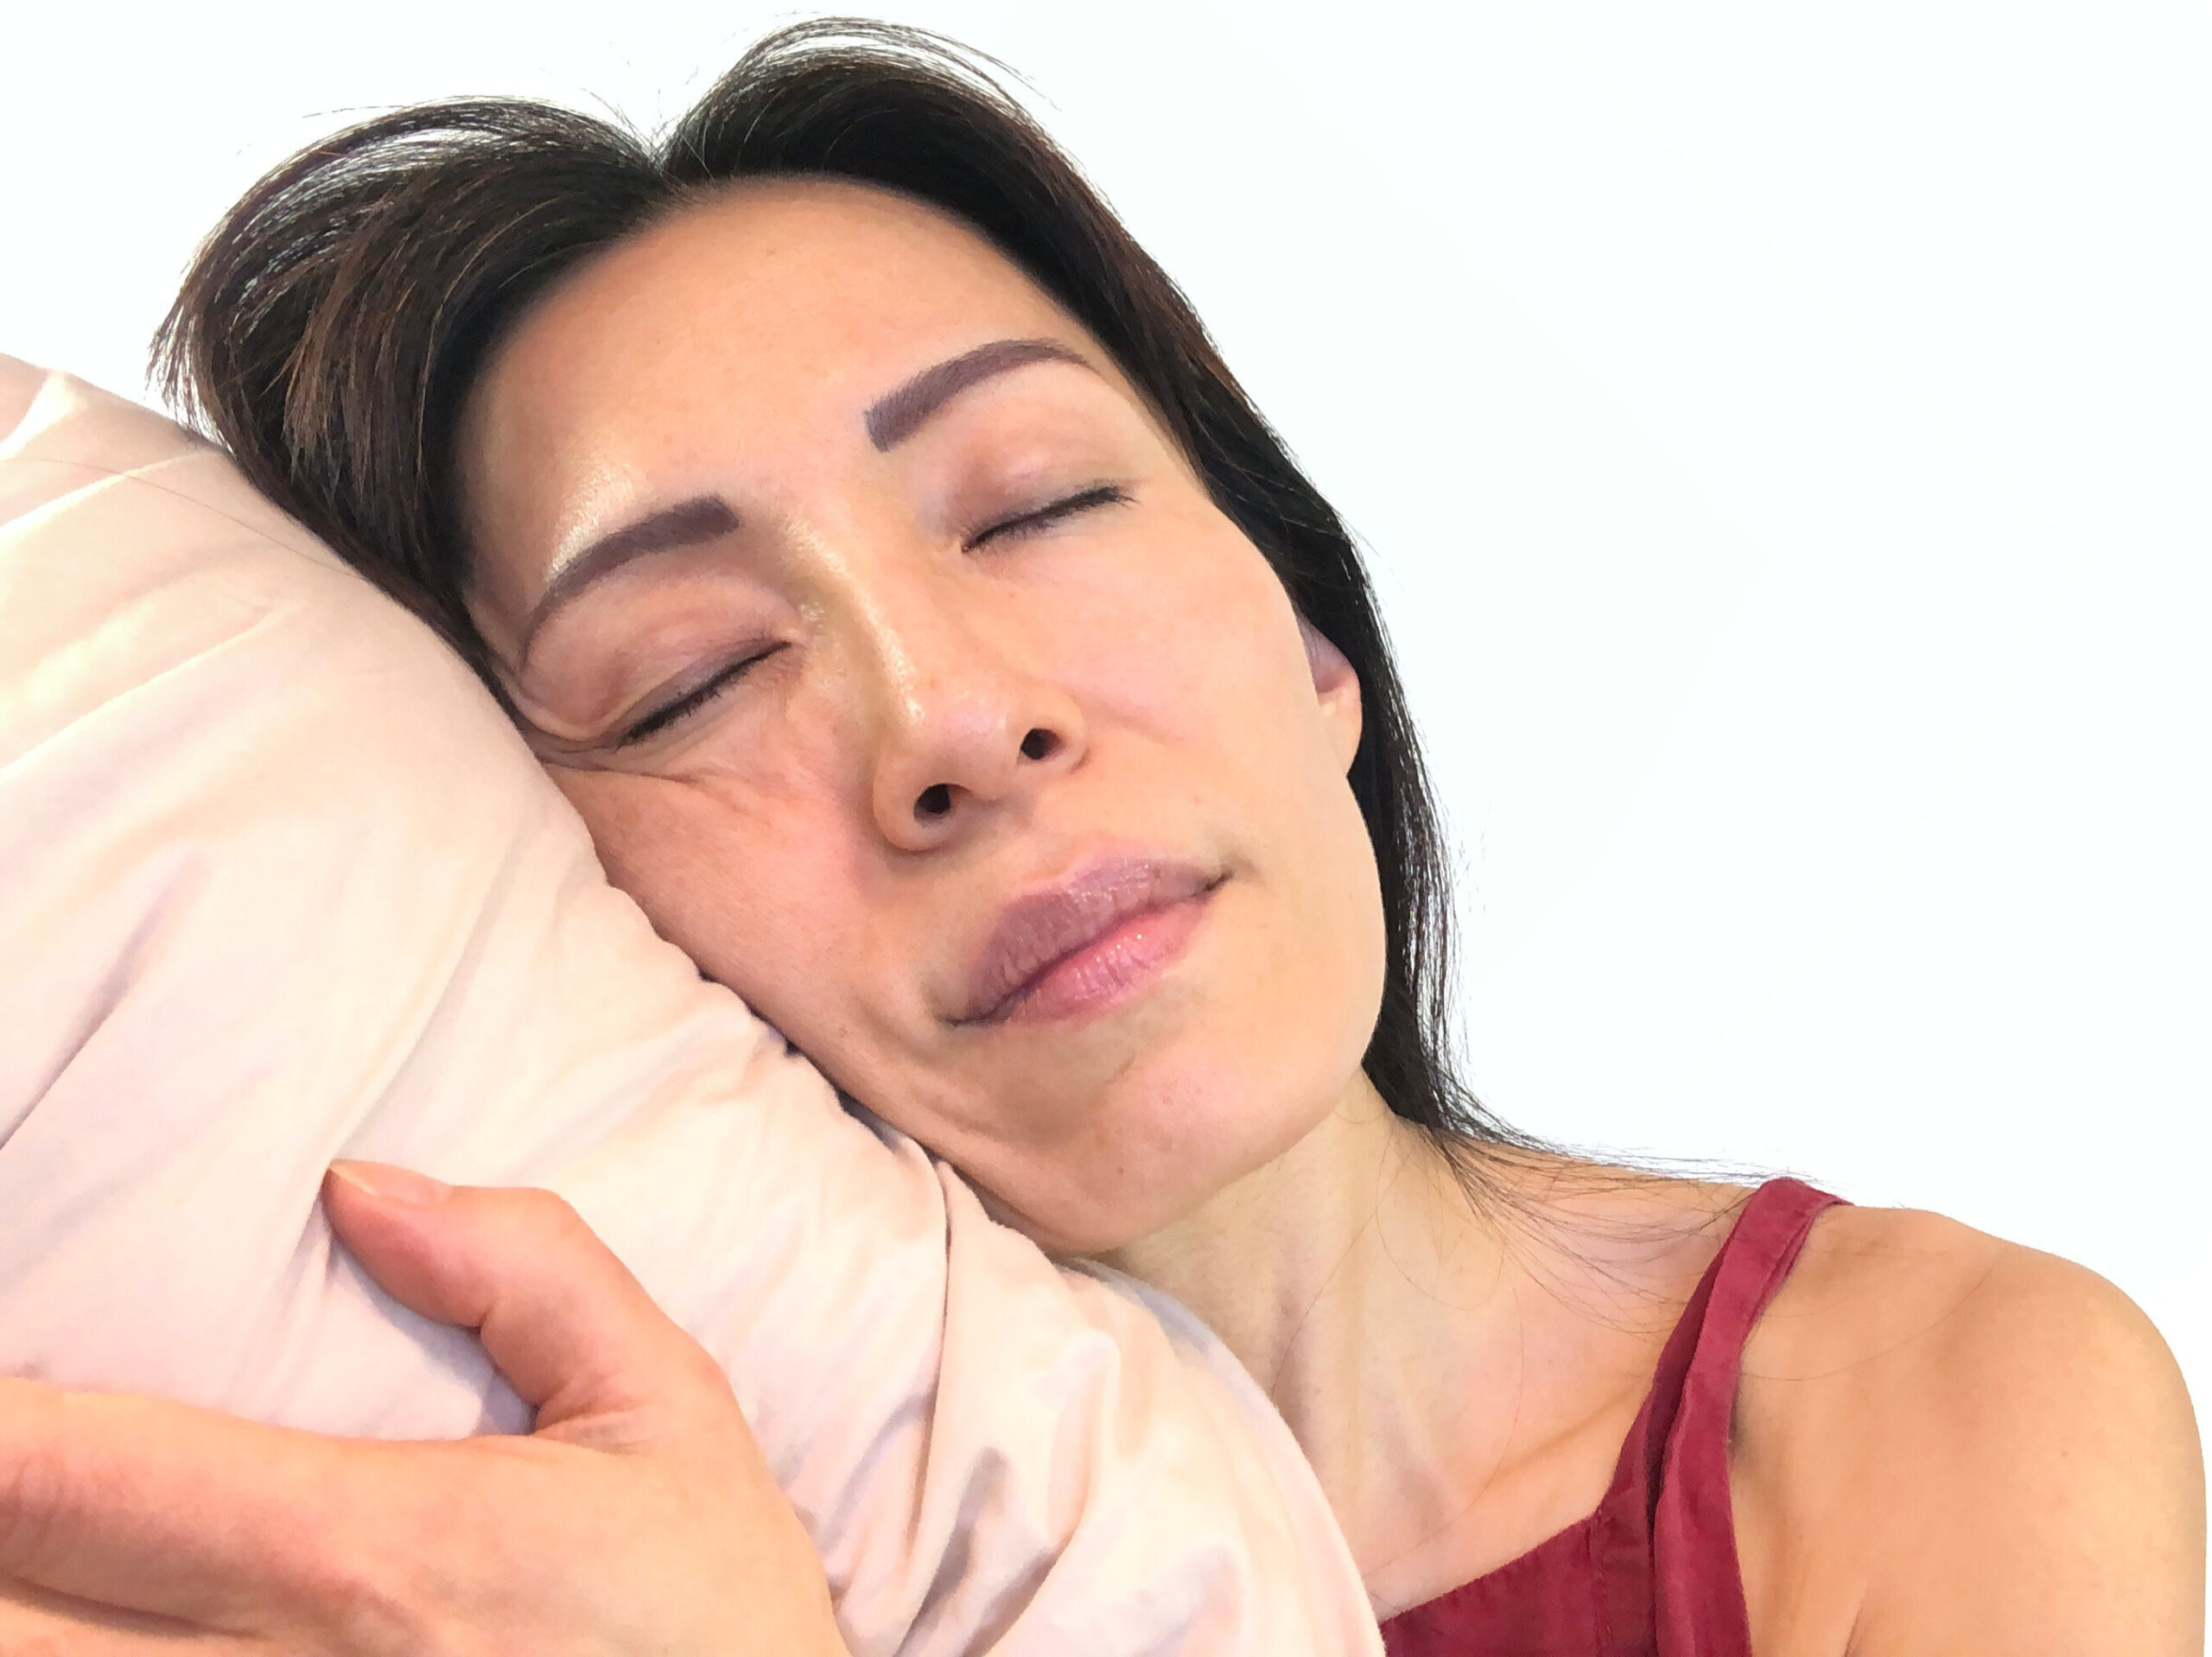 A woman is sleeping on her side, pressing her face against the pillow, causing lines and wrinkles to form.